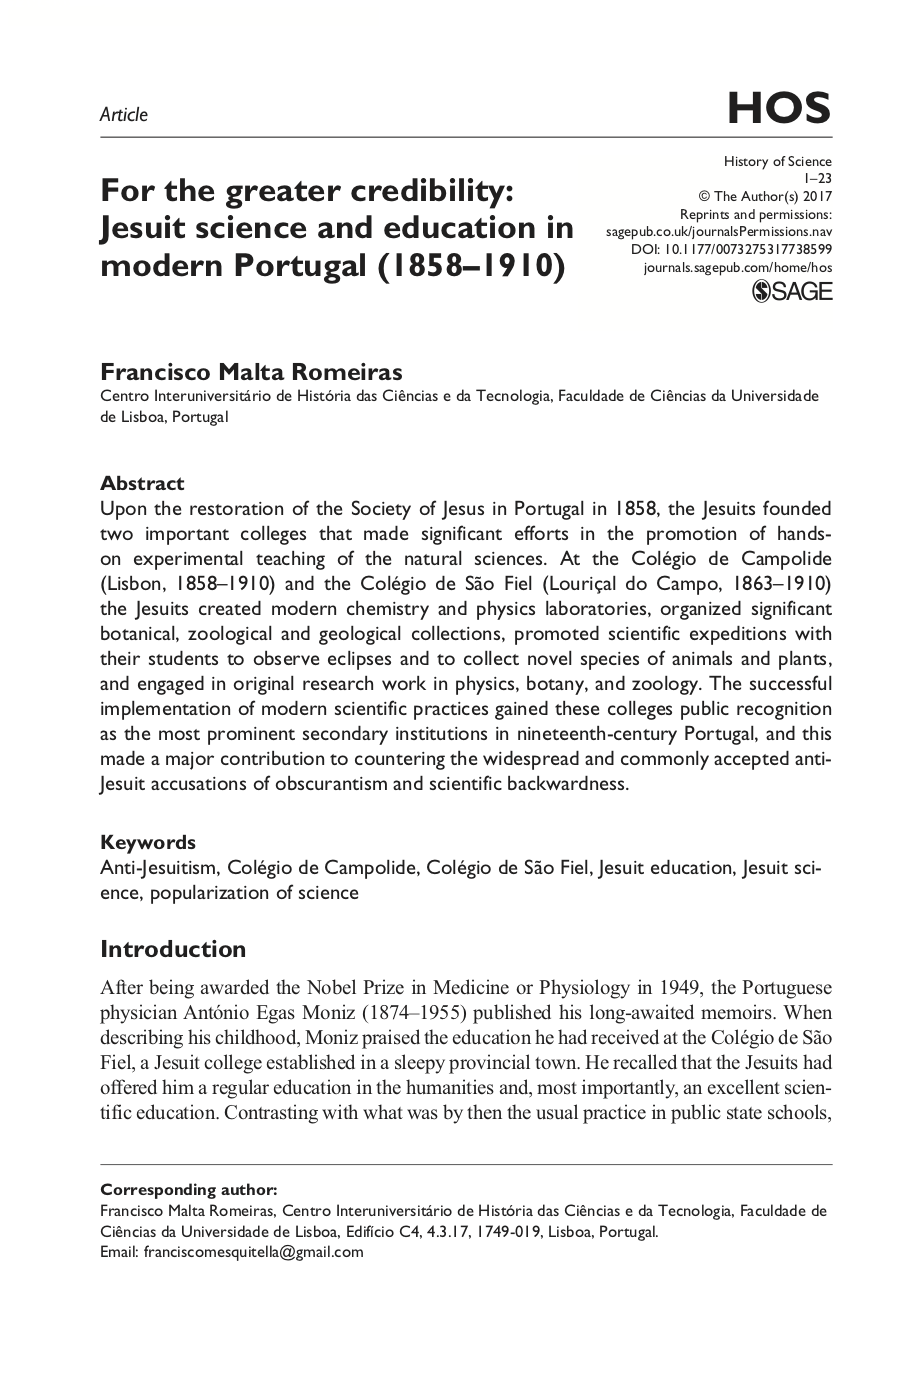 For the Greater Credibility: Jesuit Science and Education in Modern Portugal (1858-2002), Capa